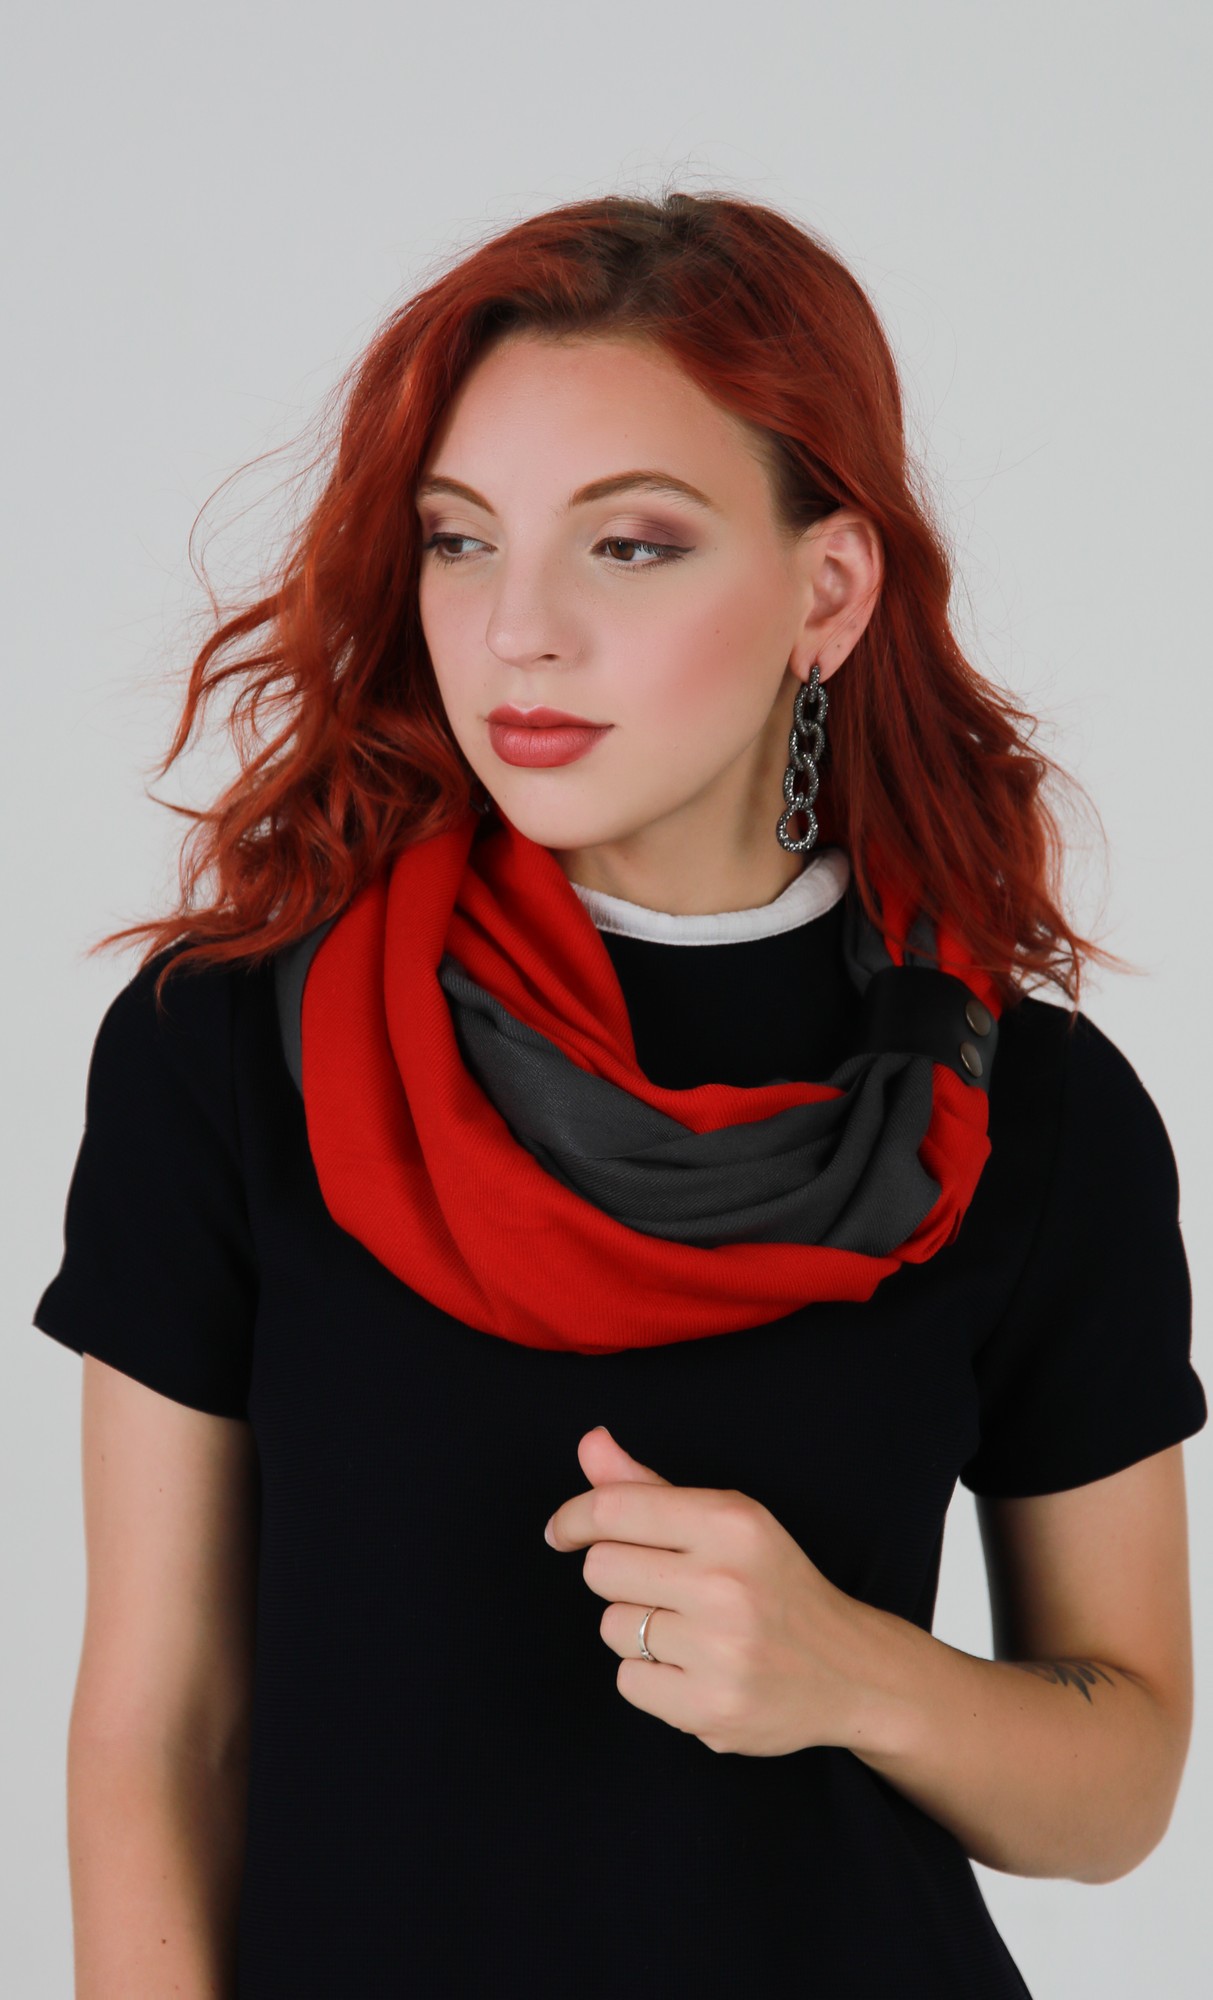 Cashmere stylish scarf Snood Black and white from the designer art sana